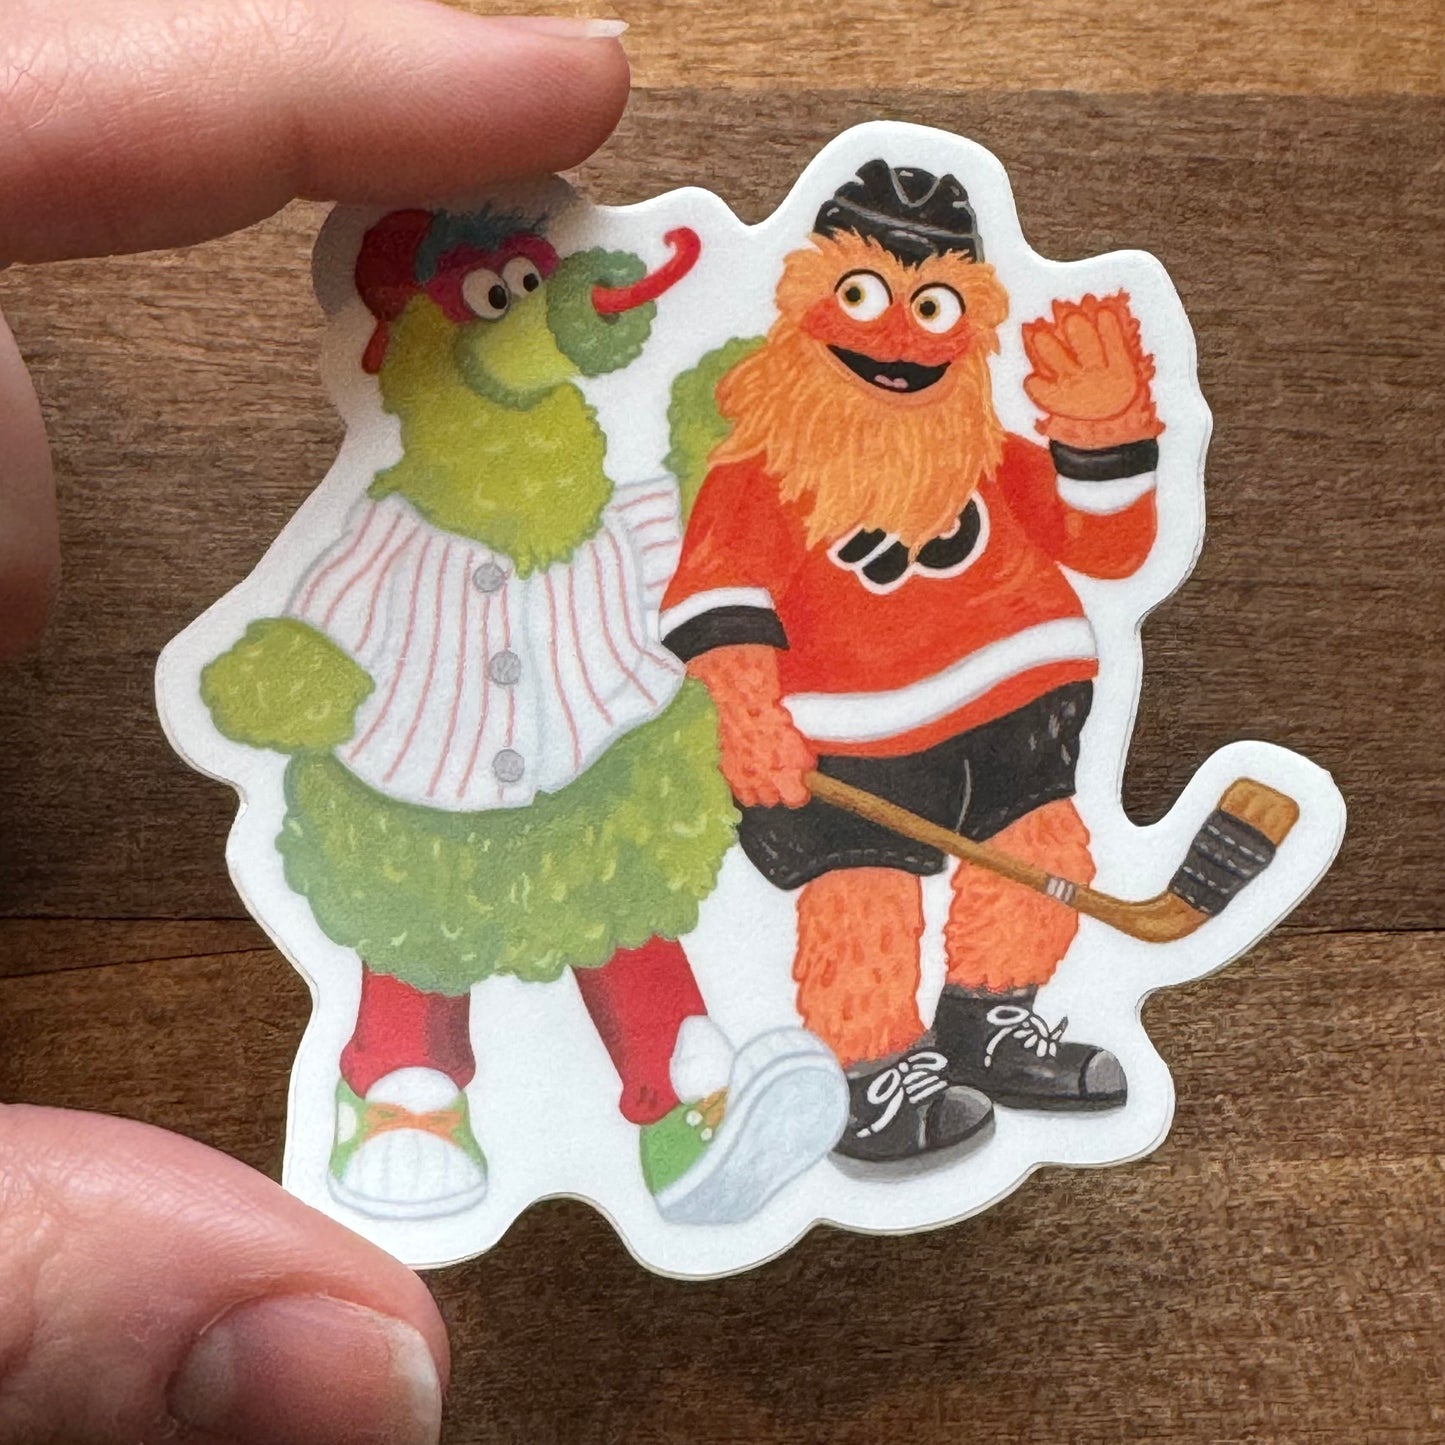 A hand holding a Jamie Bendas Gritty & Phanatic BFF Sticker featuring illustrated characters, one dressed as a baseball player and the other as a hockey player.